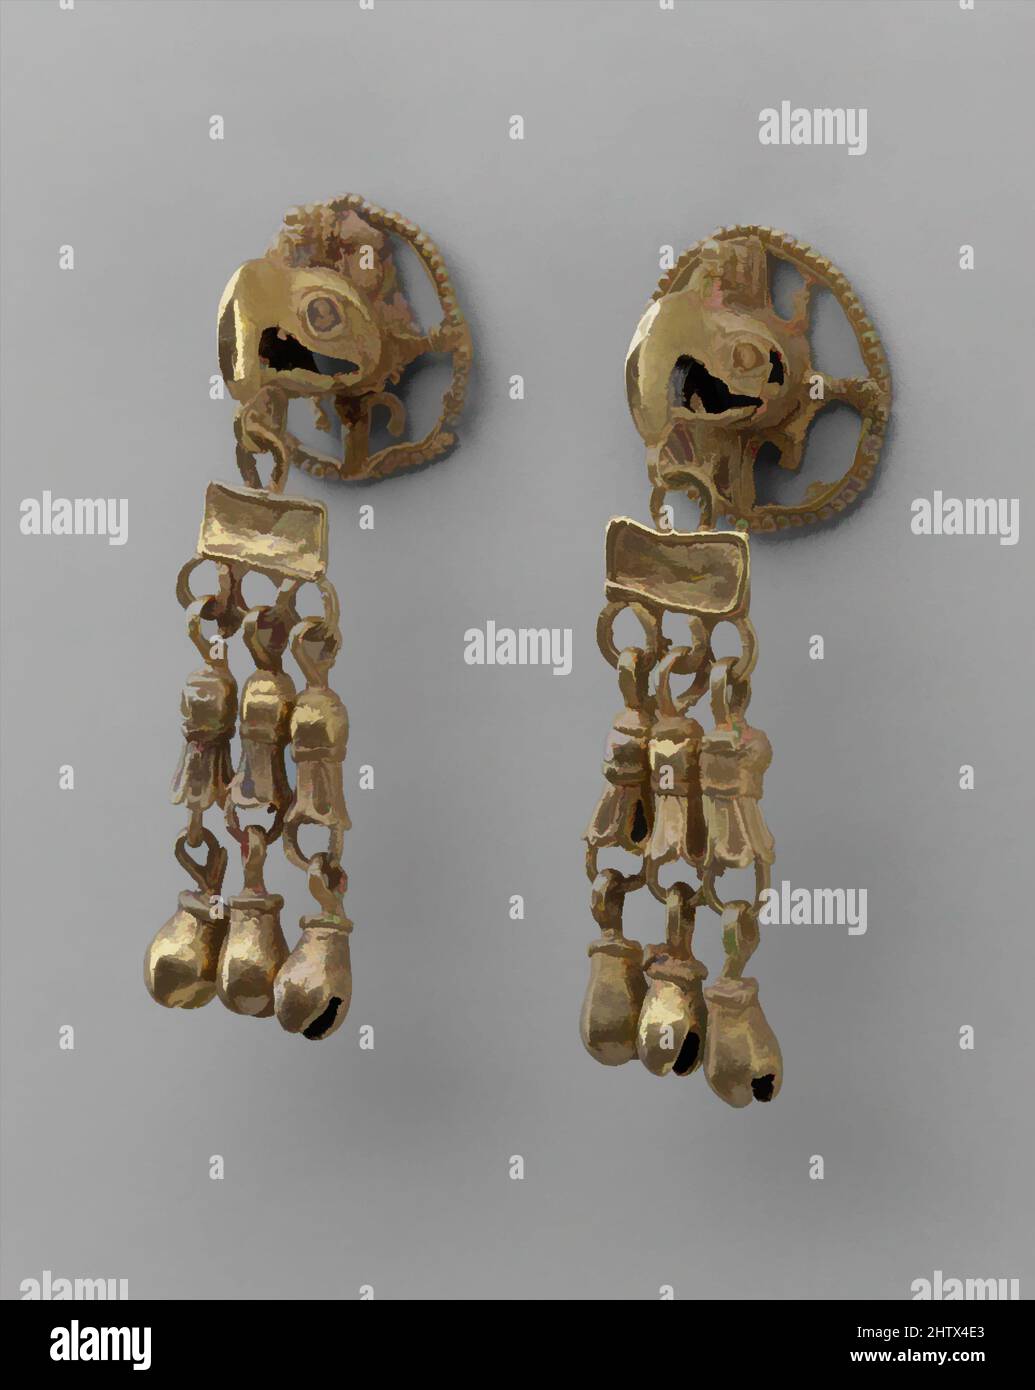 Art inspired by Pair of Eagle Ear Ornaments, 15th–16th century, Mexico, Mesoamerica, Aztec or Mixtec, Gold, H. 2 3/8 x W. 1 3/16 in. (6 x 2.1 cm), Metal-Ornaments, Classic works modernized by Artotop with a splash of modernity. Shapes, color and value, eye-catching visual impact on art. Emotions through freedom of artworks in a contemporary way. A timeless message pursuing a wildly creative new direction. Artists turning to the digital medium and creating the Artotop NFT Stock Photo